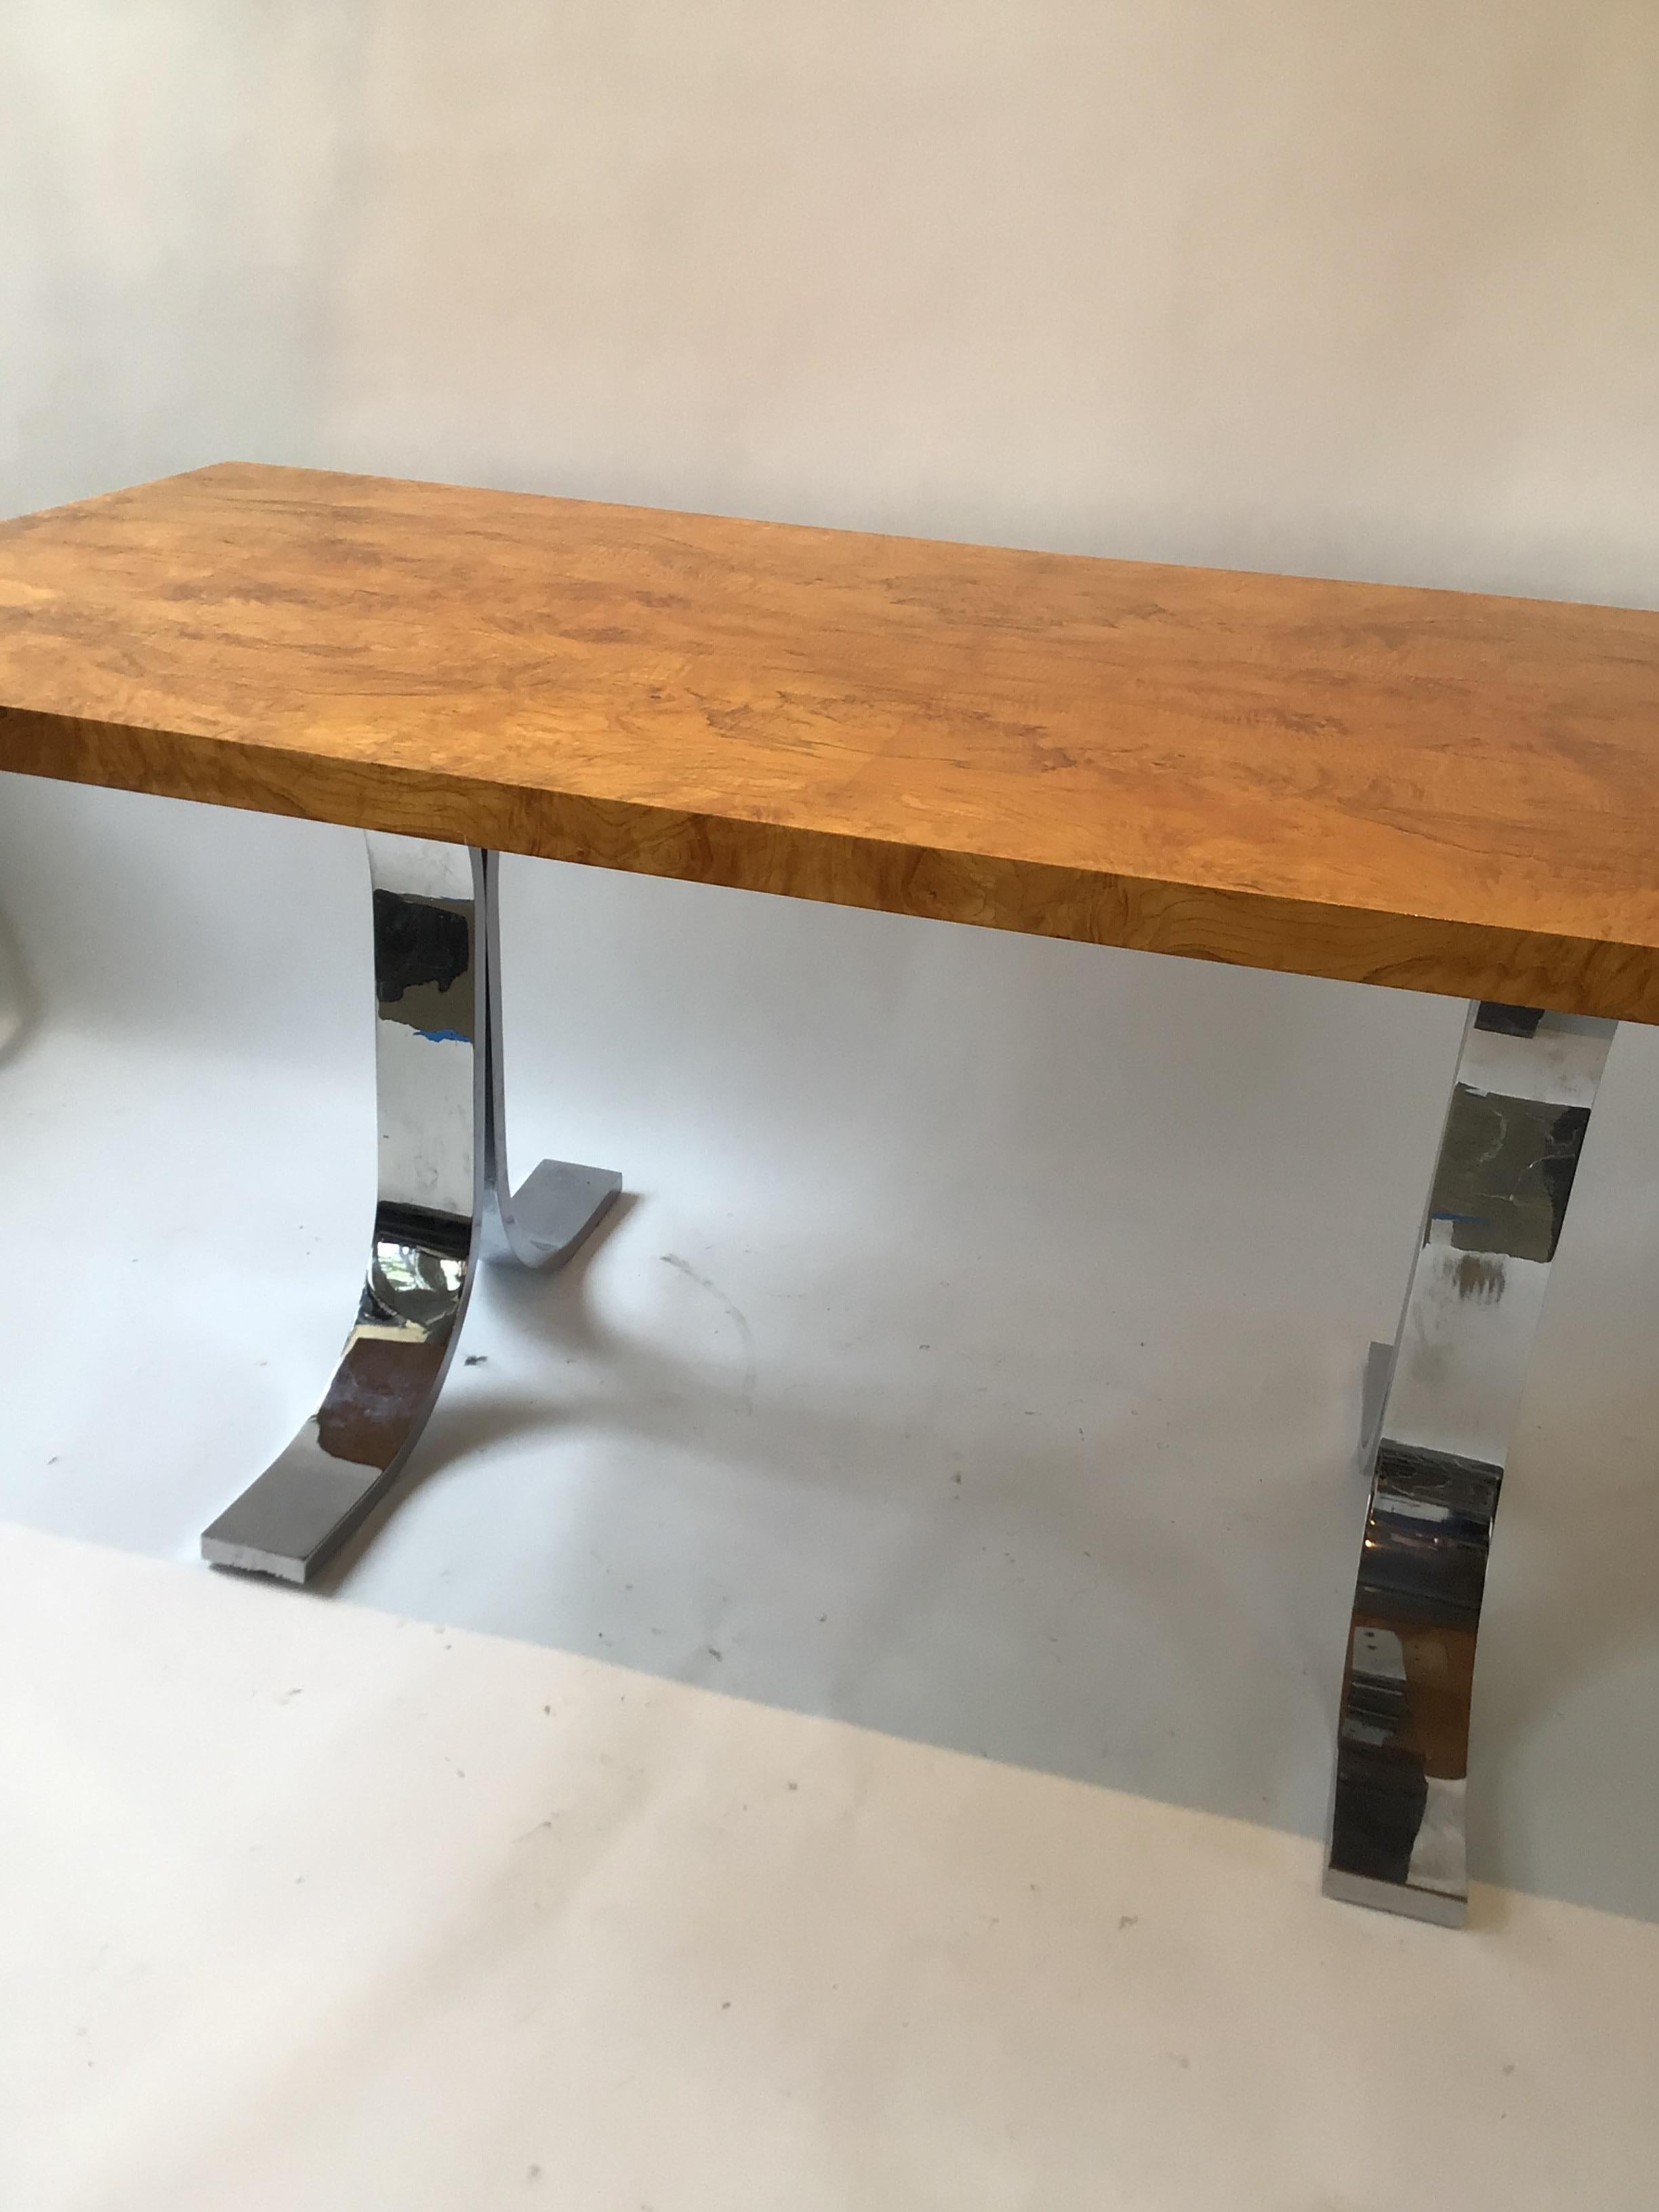 1980s Milo Baughman Style Burl Wood Dining Table / Desk with Chrome Base In Good Condition For Sale In Tarrytown, NY